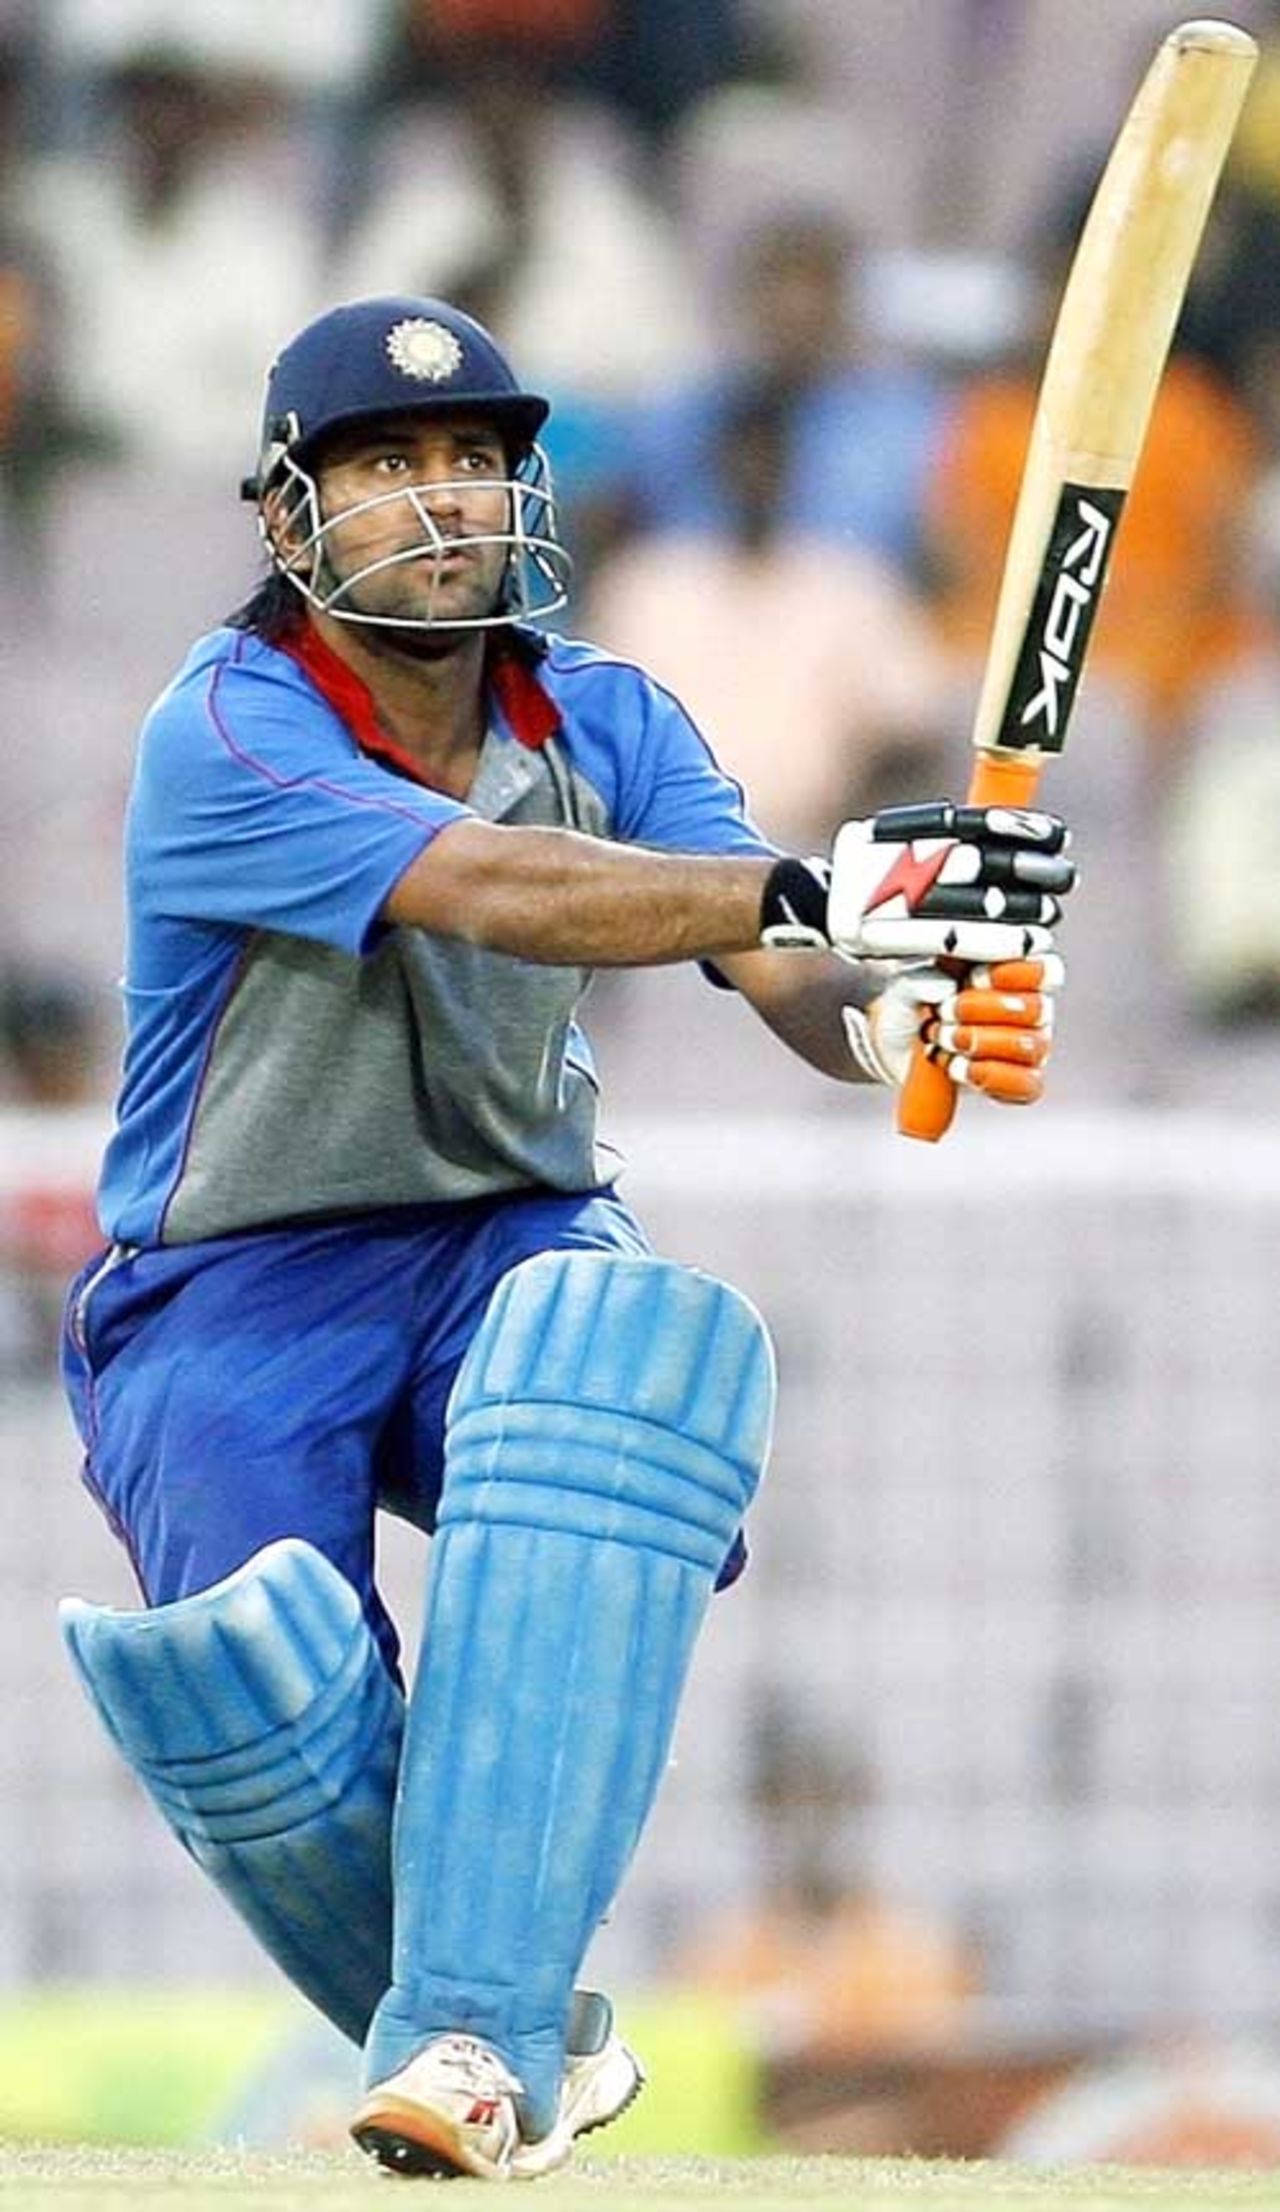 MS Dhoni clobbers this one to the mid-wicket boundary during the third ODI of the Afro-Asia Cup, Chennai, June 10, 2007